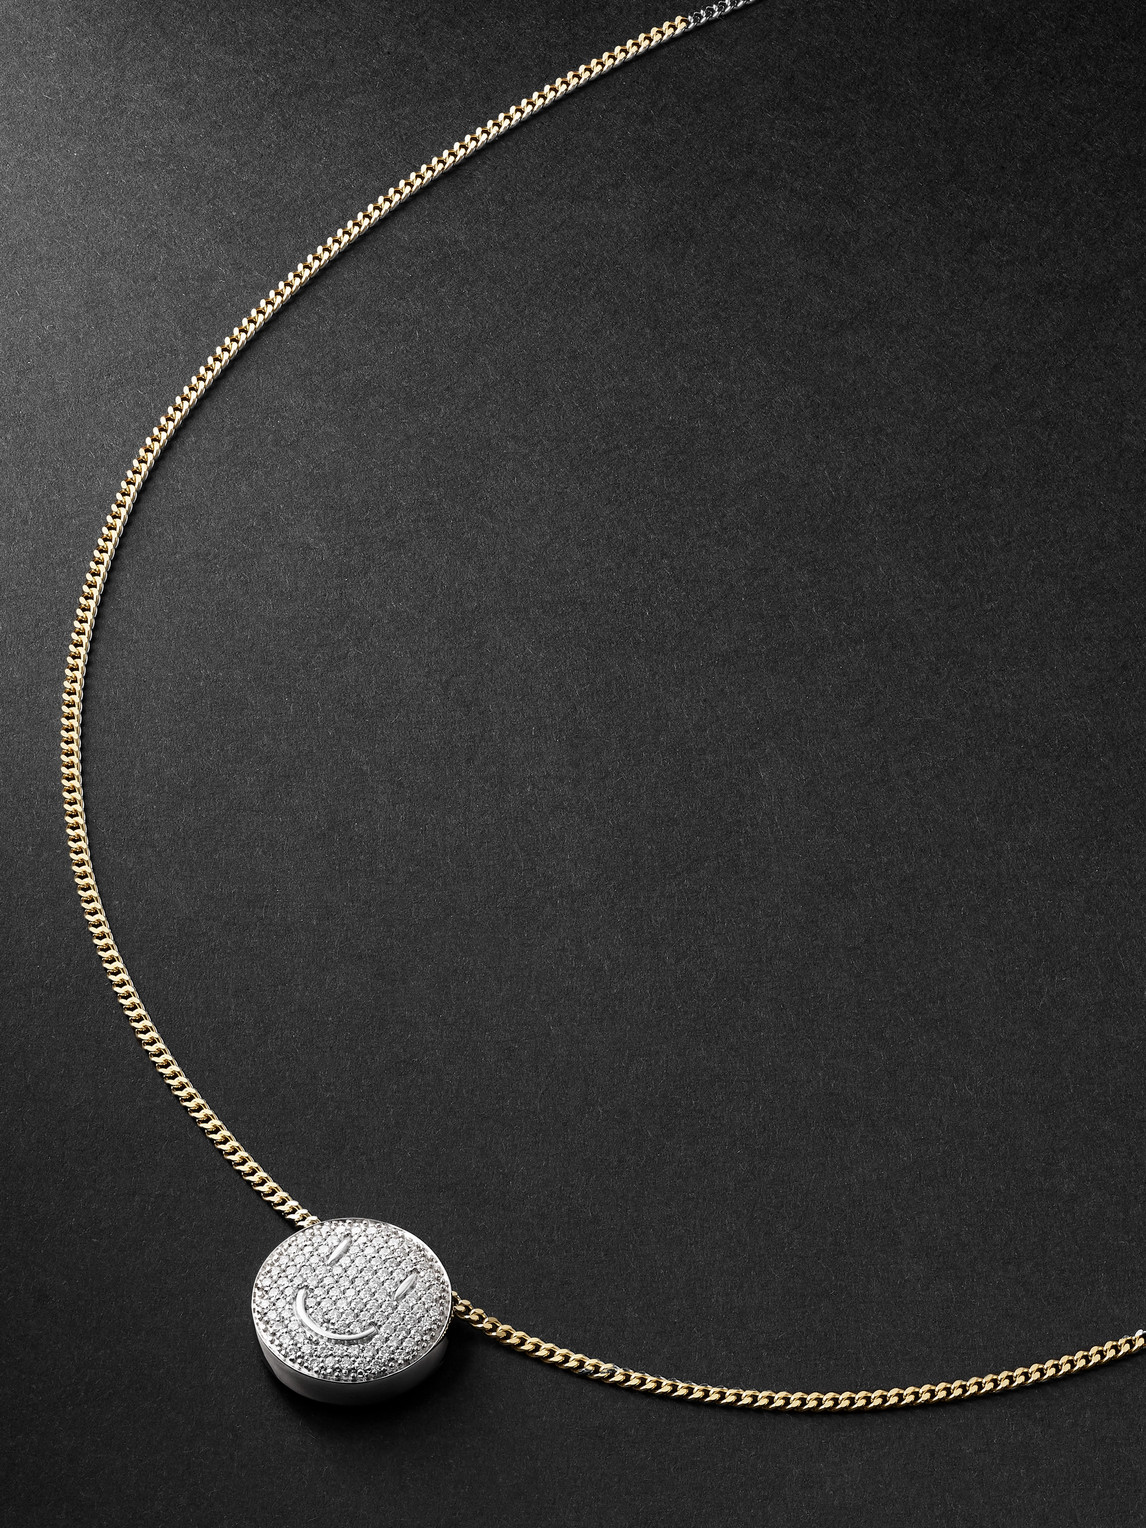 Eéra Smile Gold And Silver Diamond Necklace